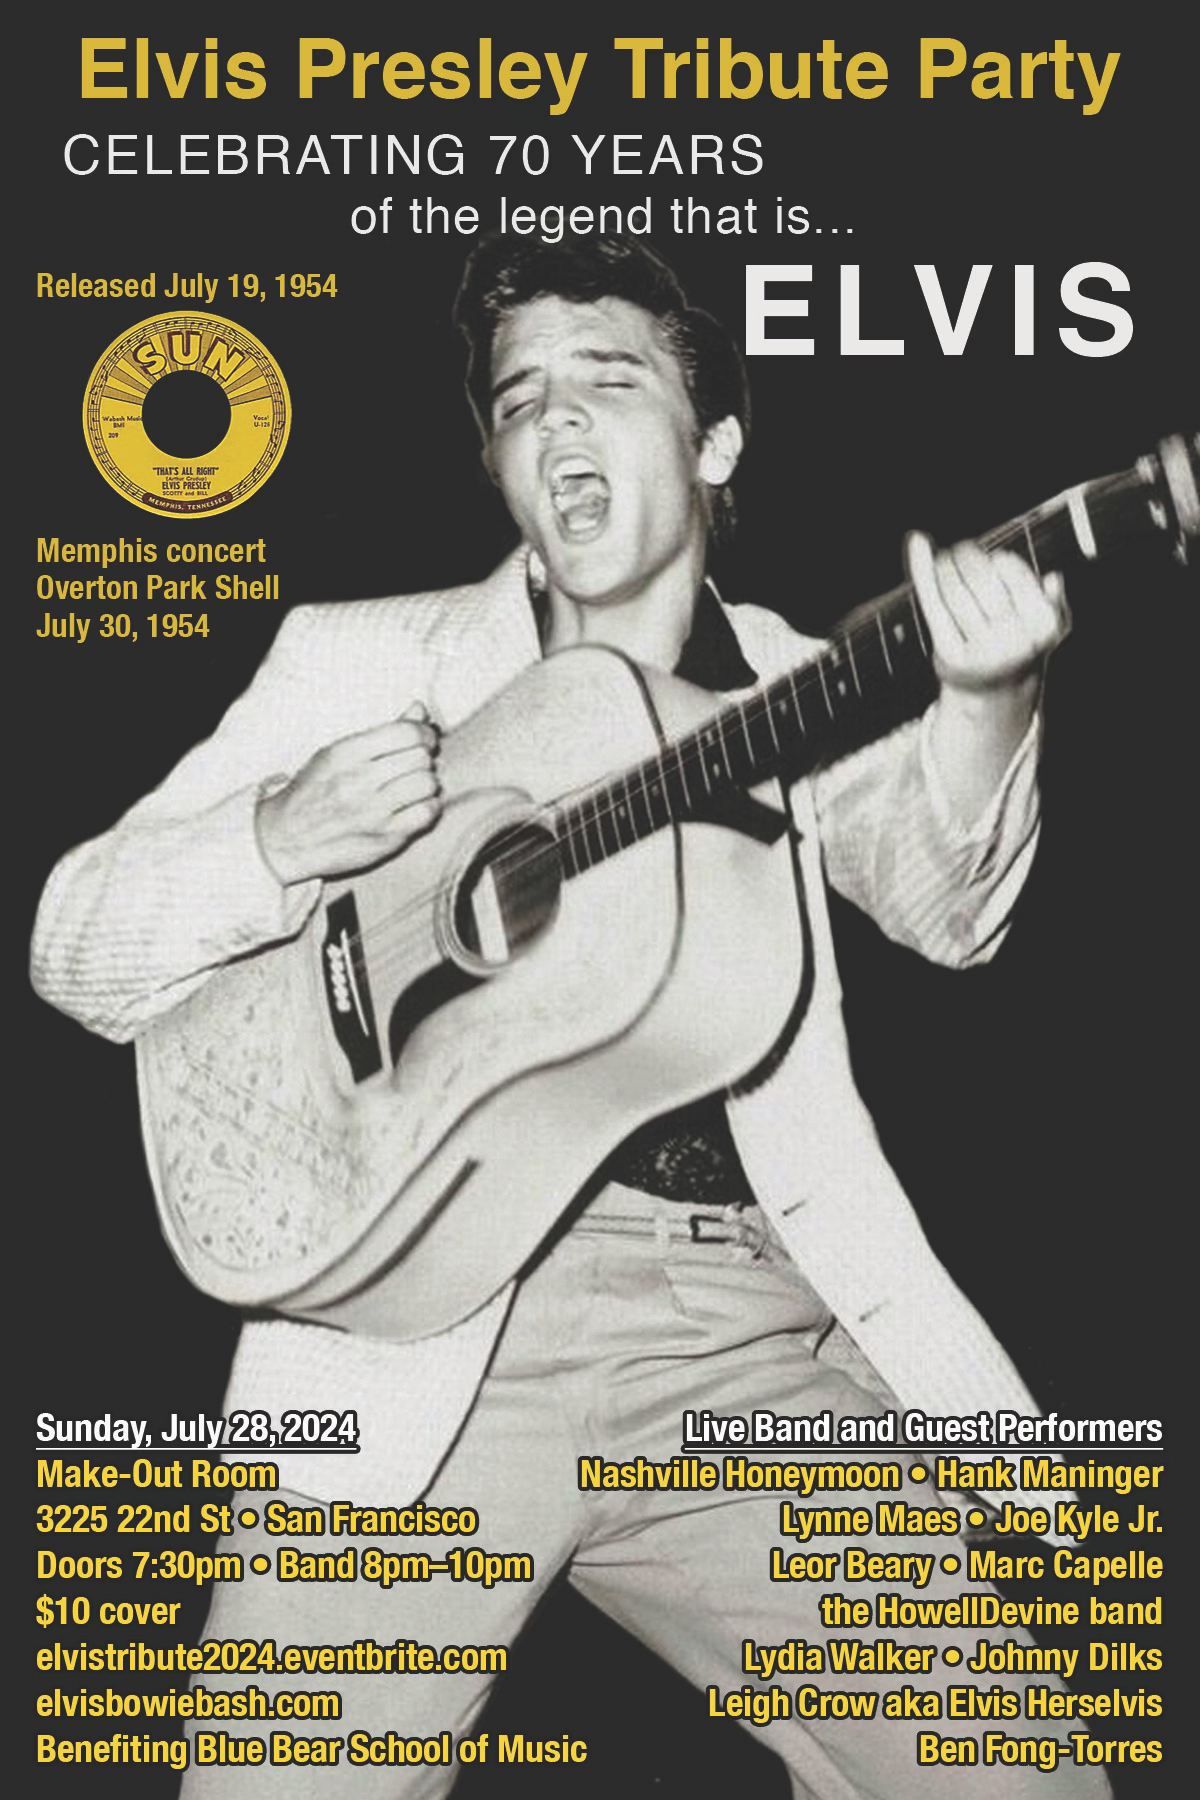 Elvis Presley Tribute Party - 70th anniversary of "The King" emergence